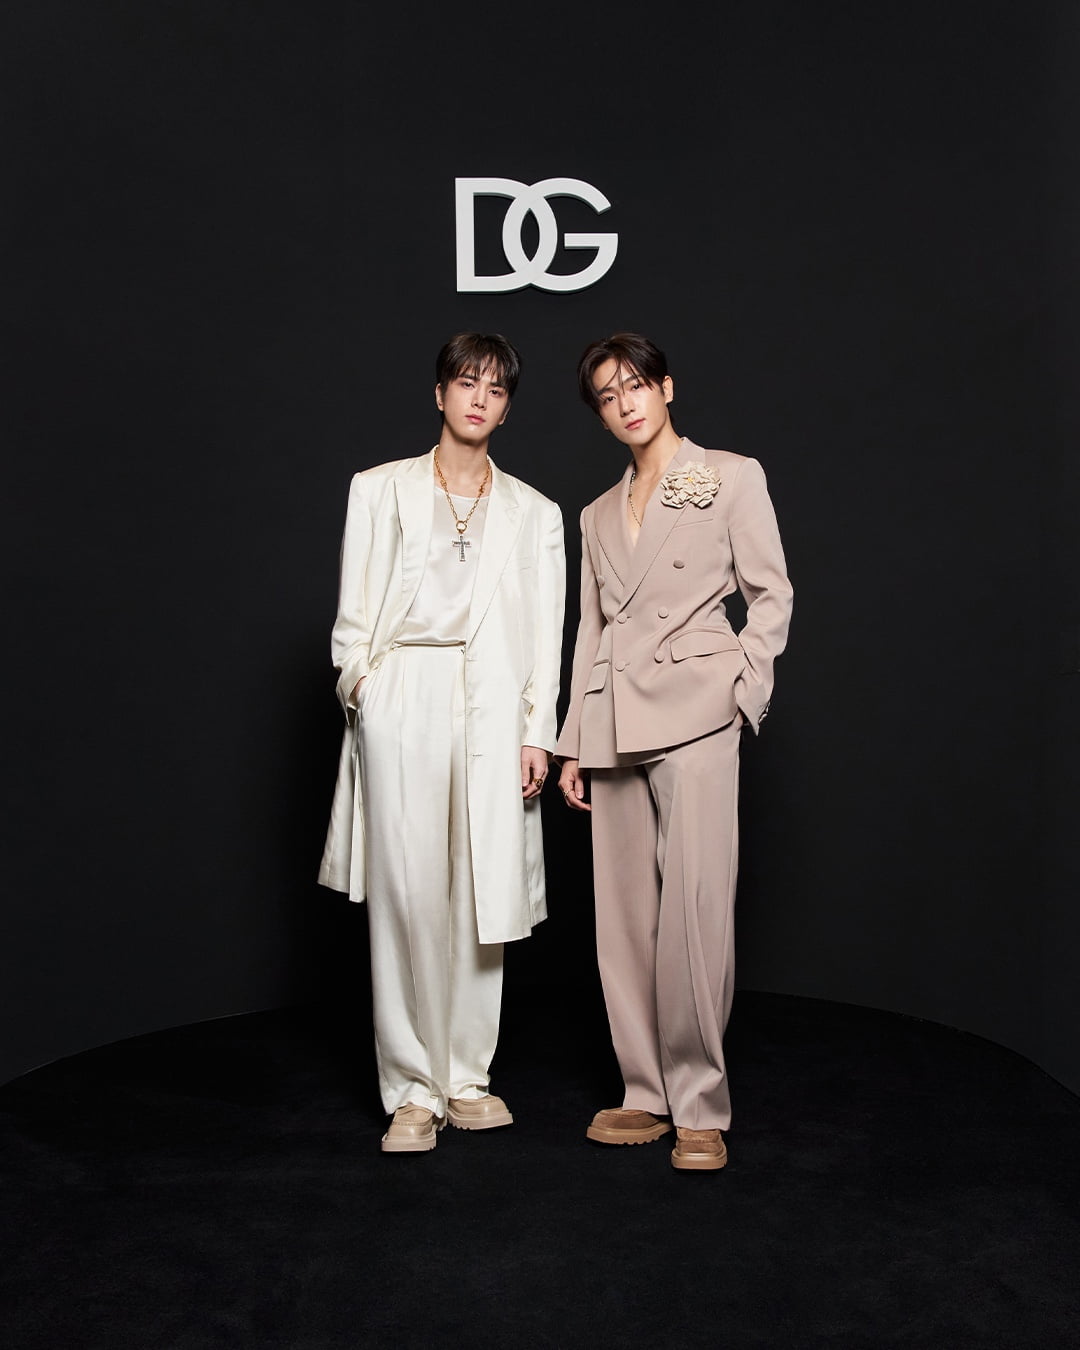 The Boyz Younghoon and Hyeonjae attend Milan Fashion Week